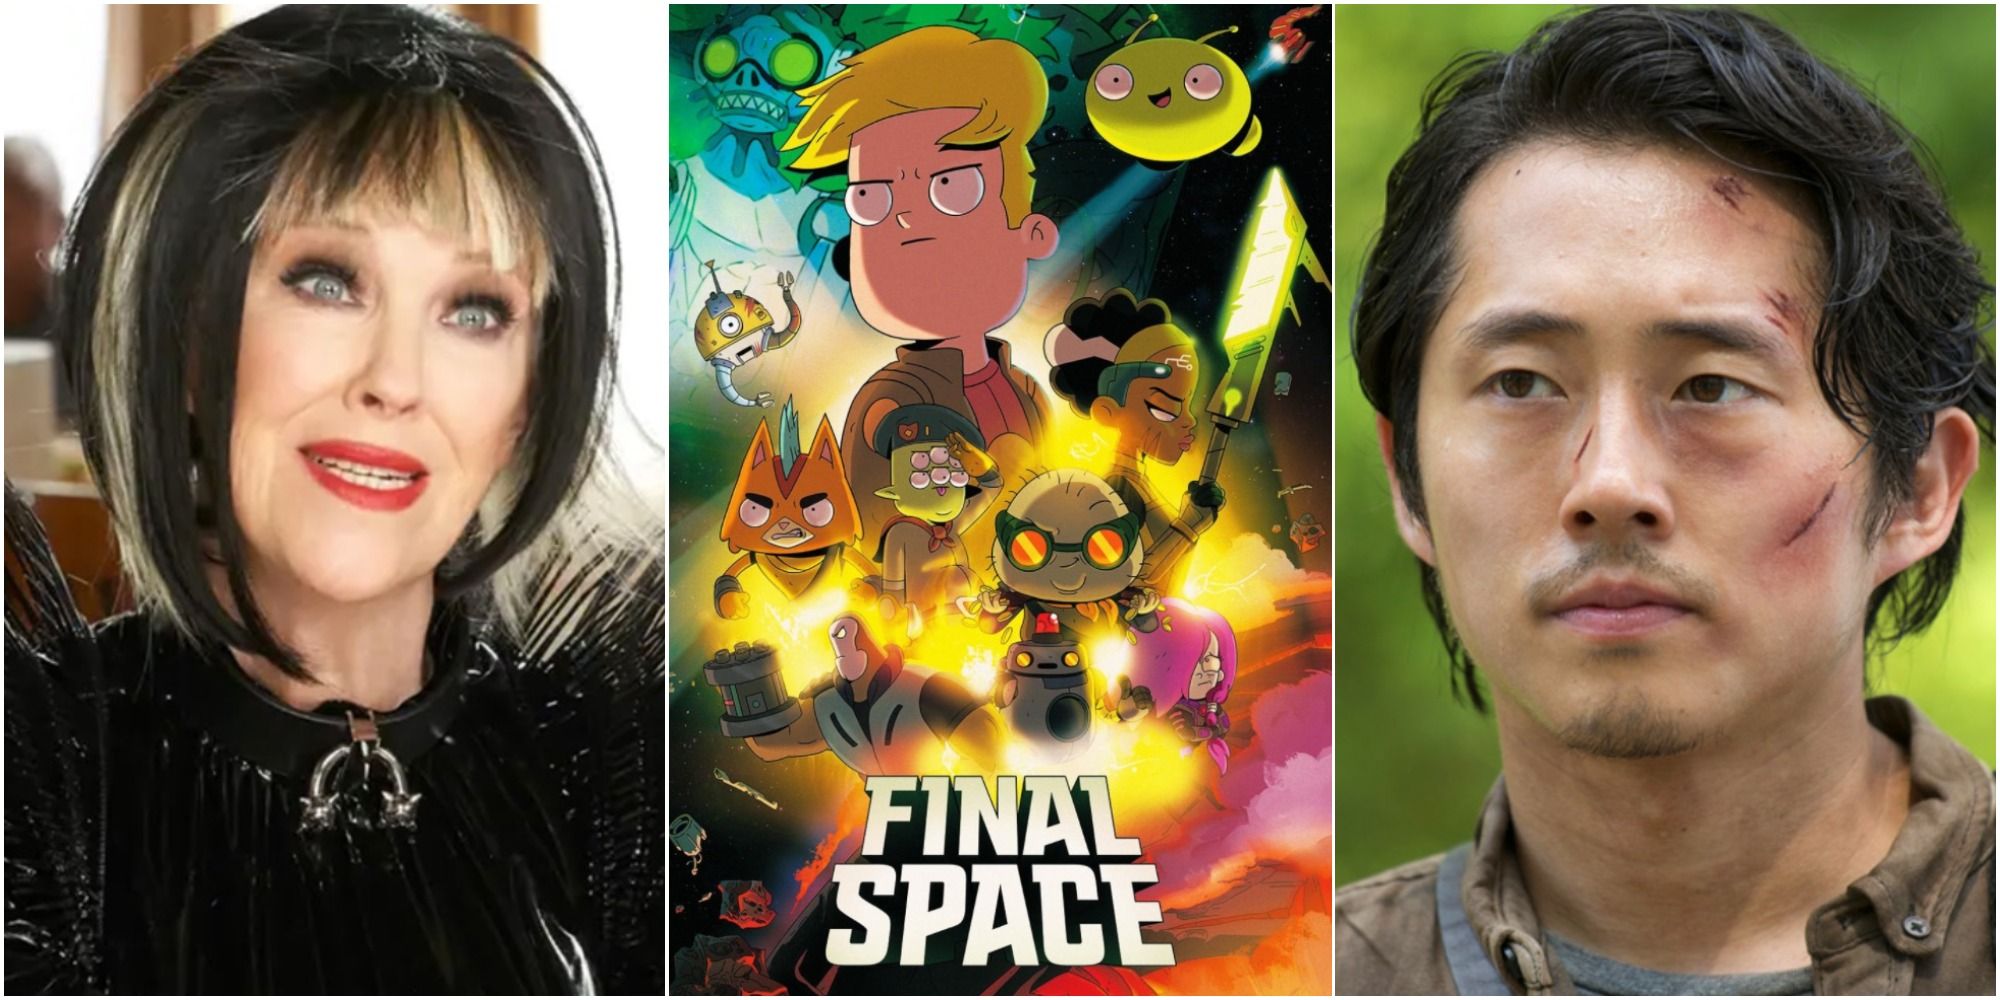 Catherine Ohara and Steven Yeun for Final Space